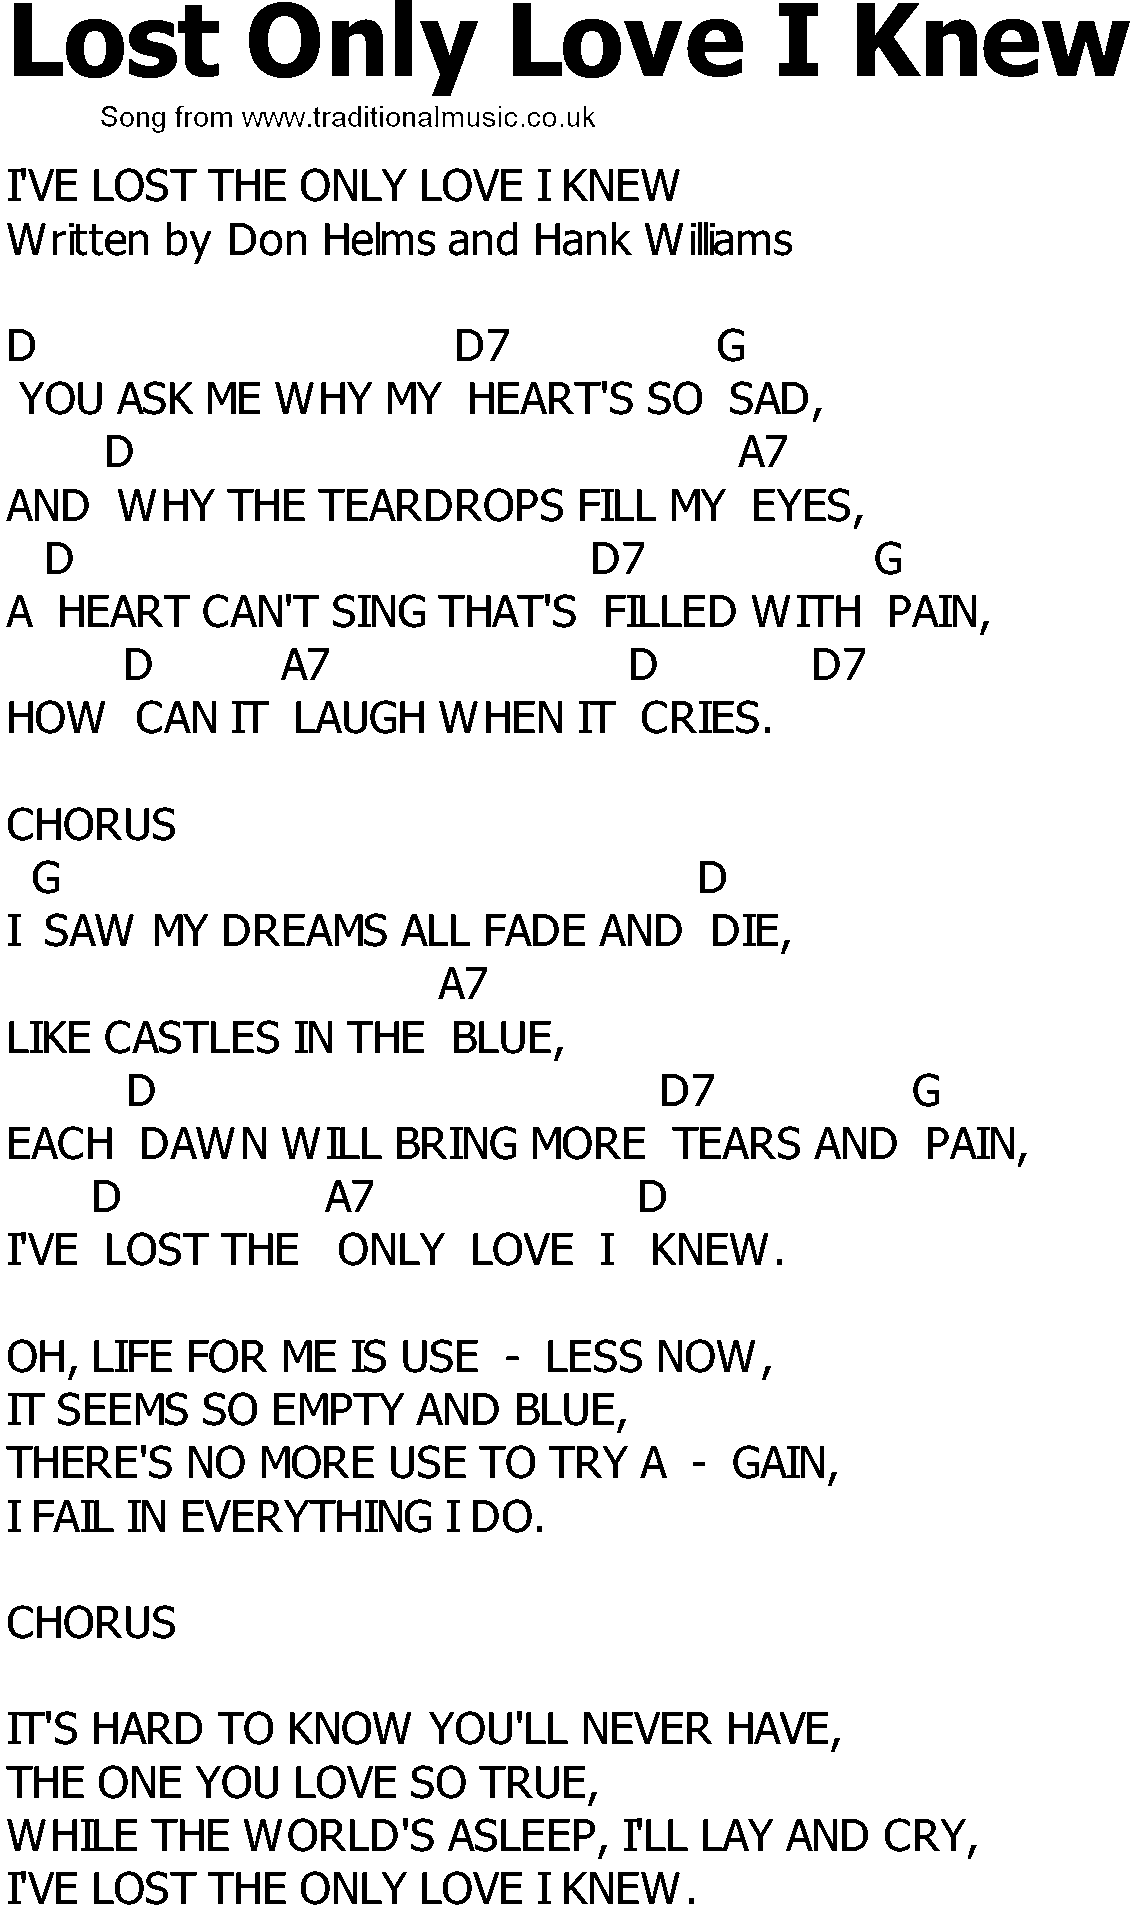 old country song lyrics with chords lost only love i knew old country